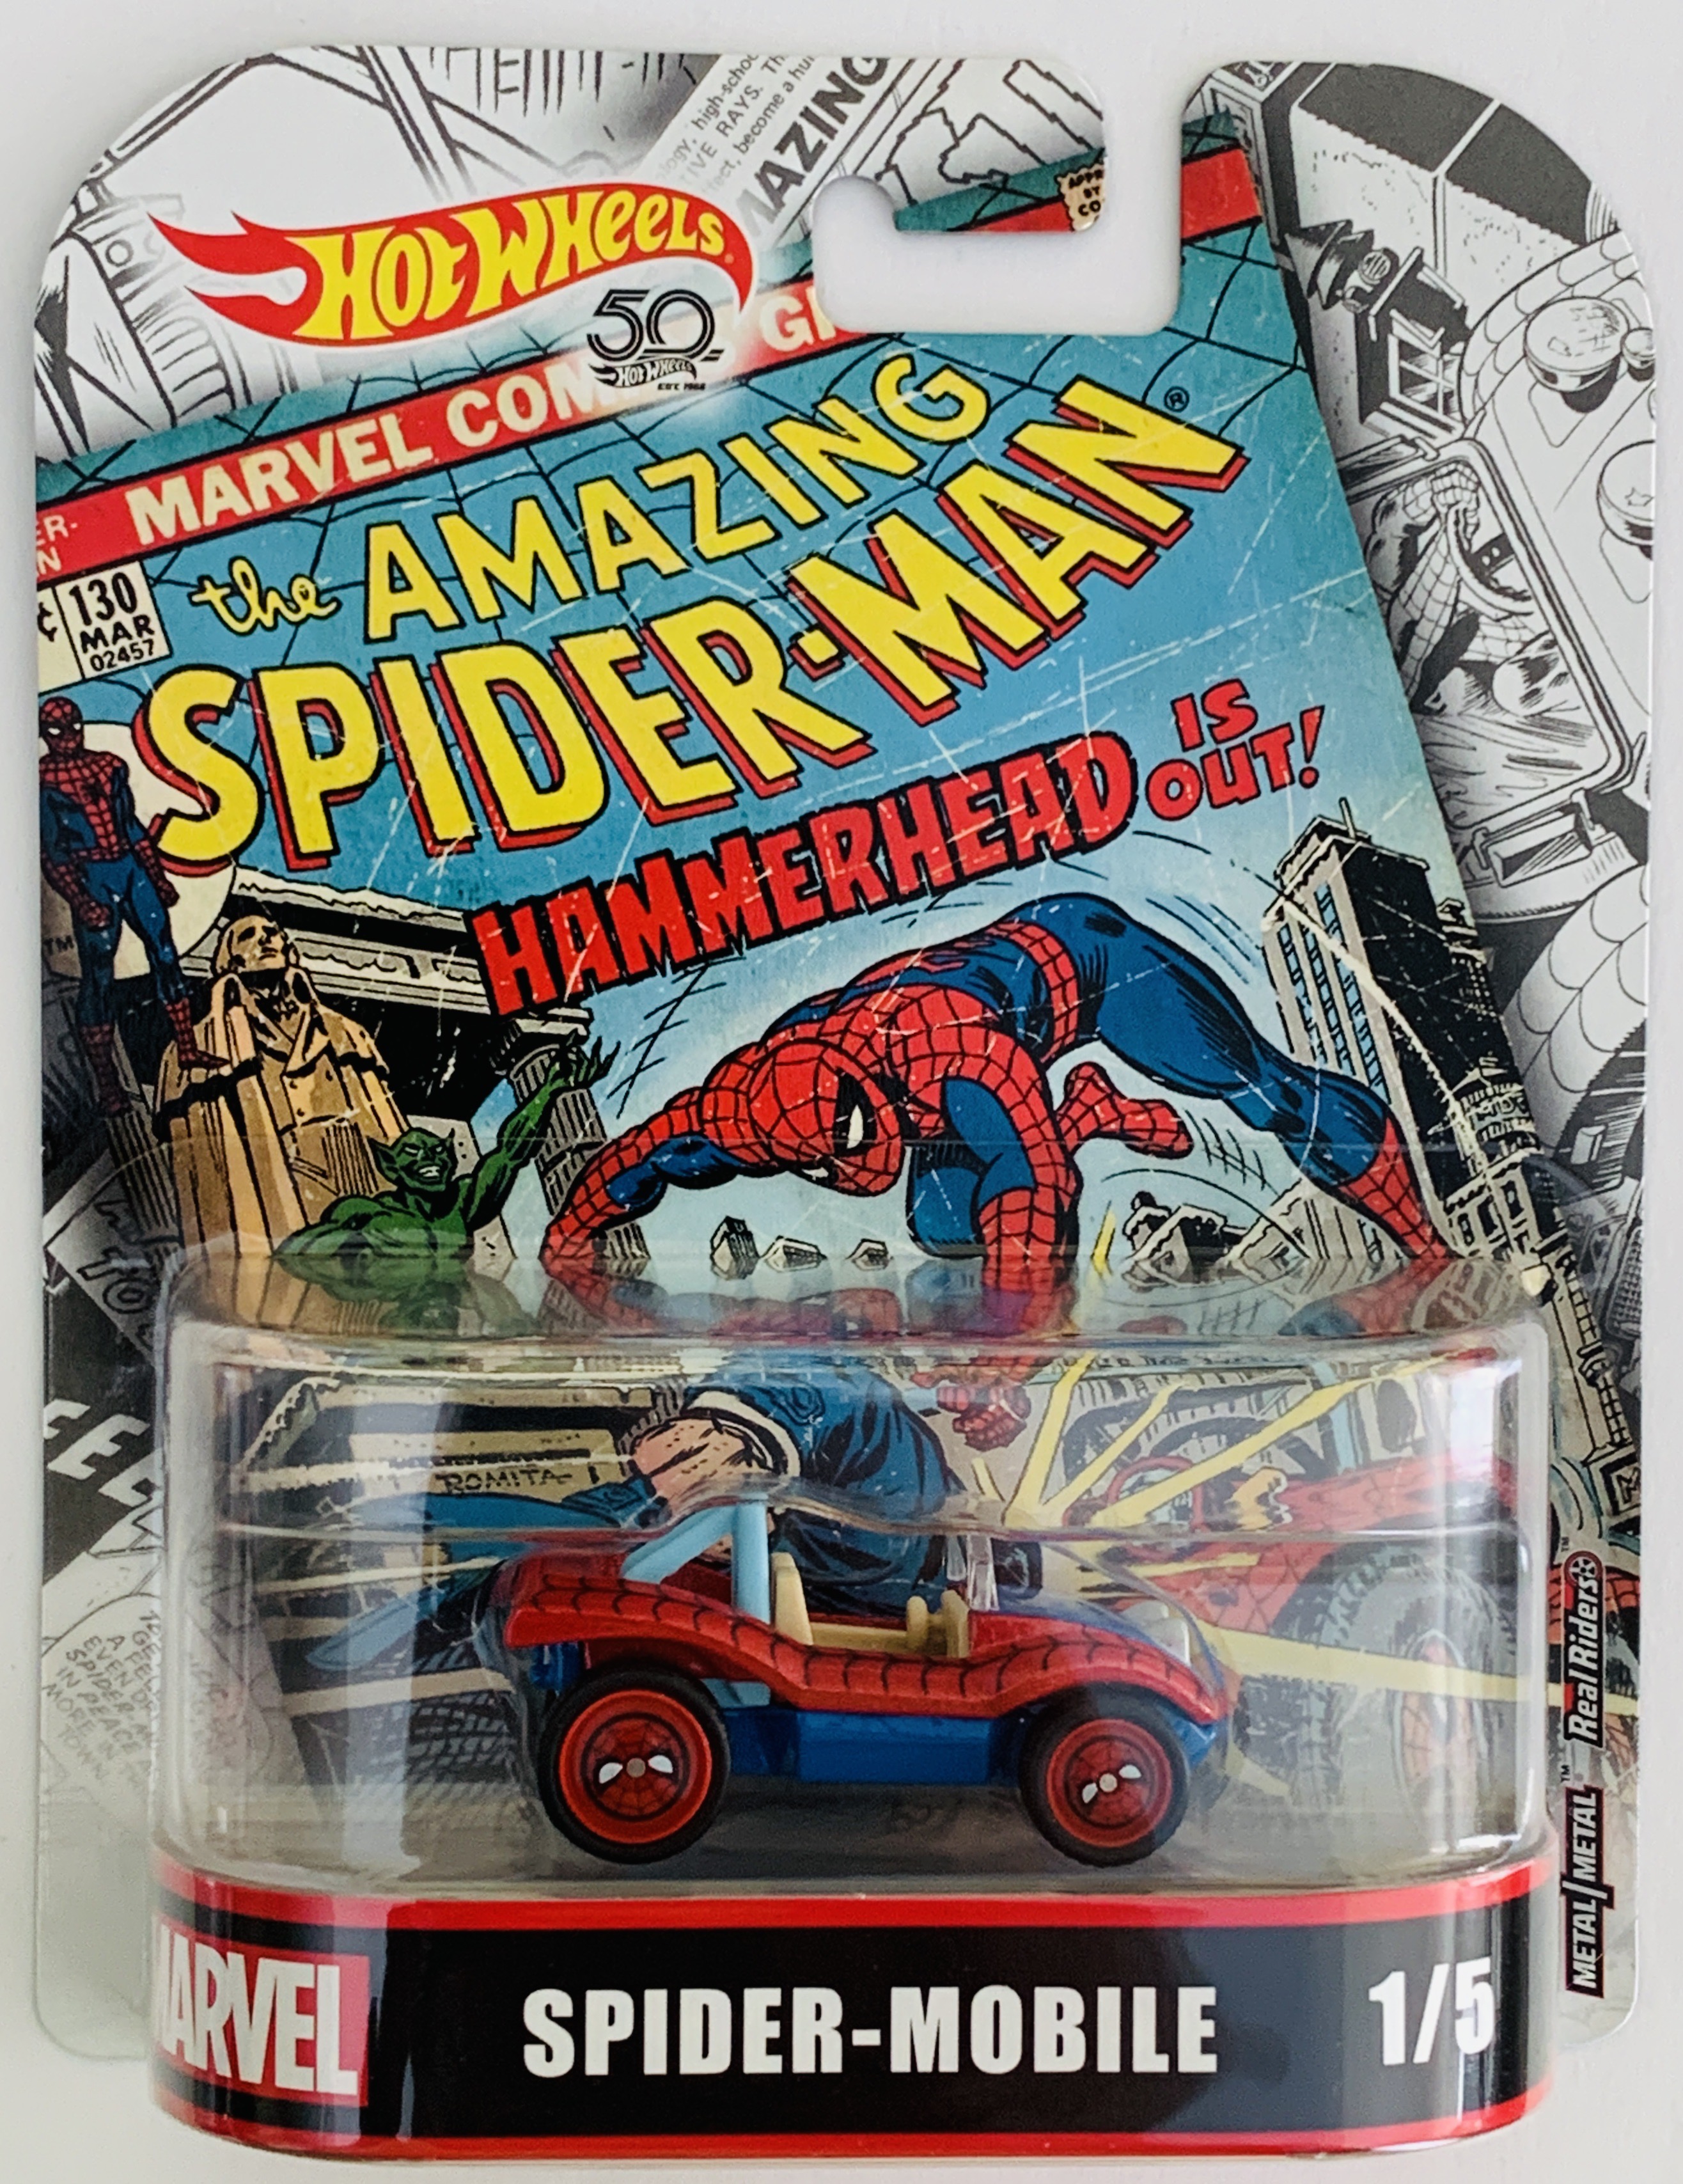 Surichinmoi Moral Anoi Hot Wheels 50th Anniversary Marvel The Amazing Spiderman Spider-Mobile